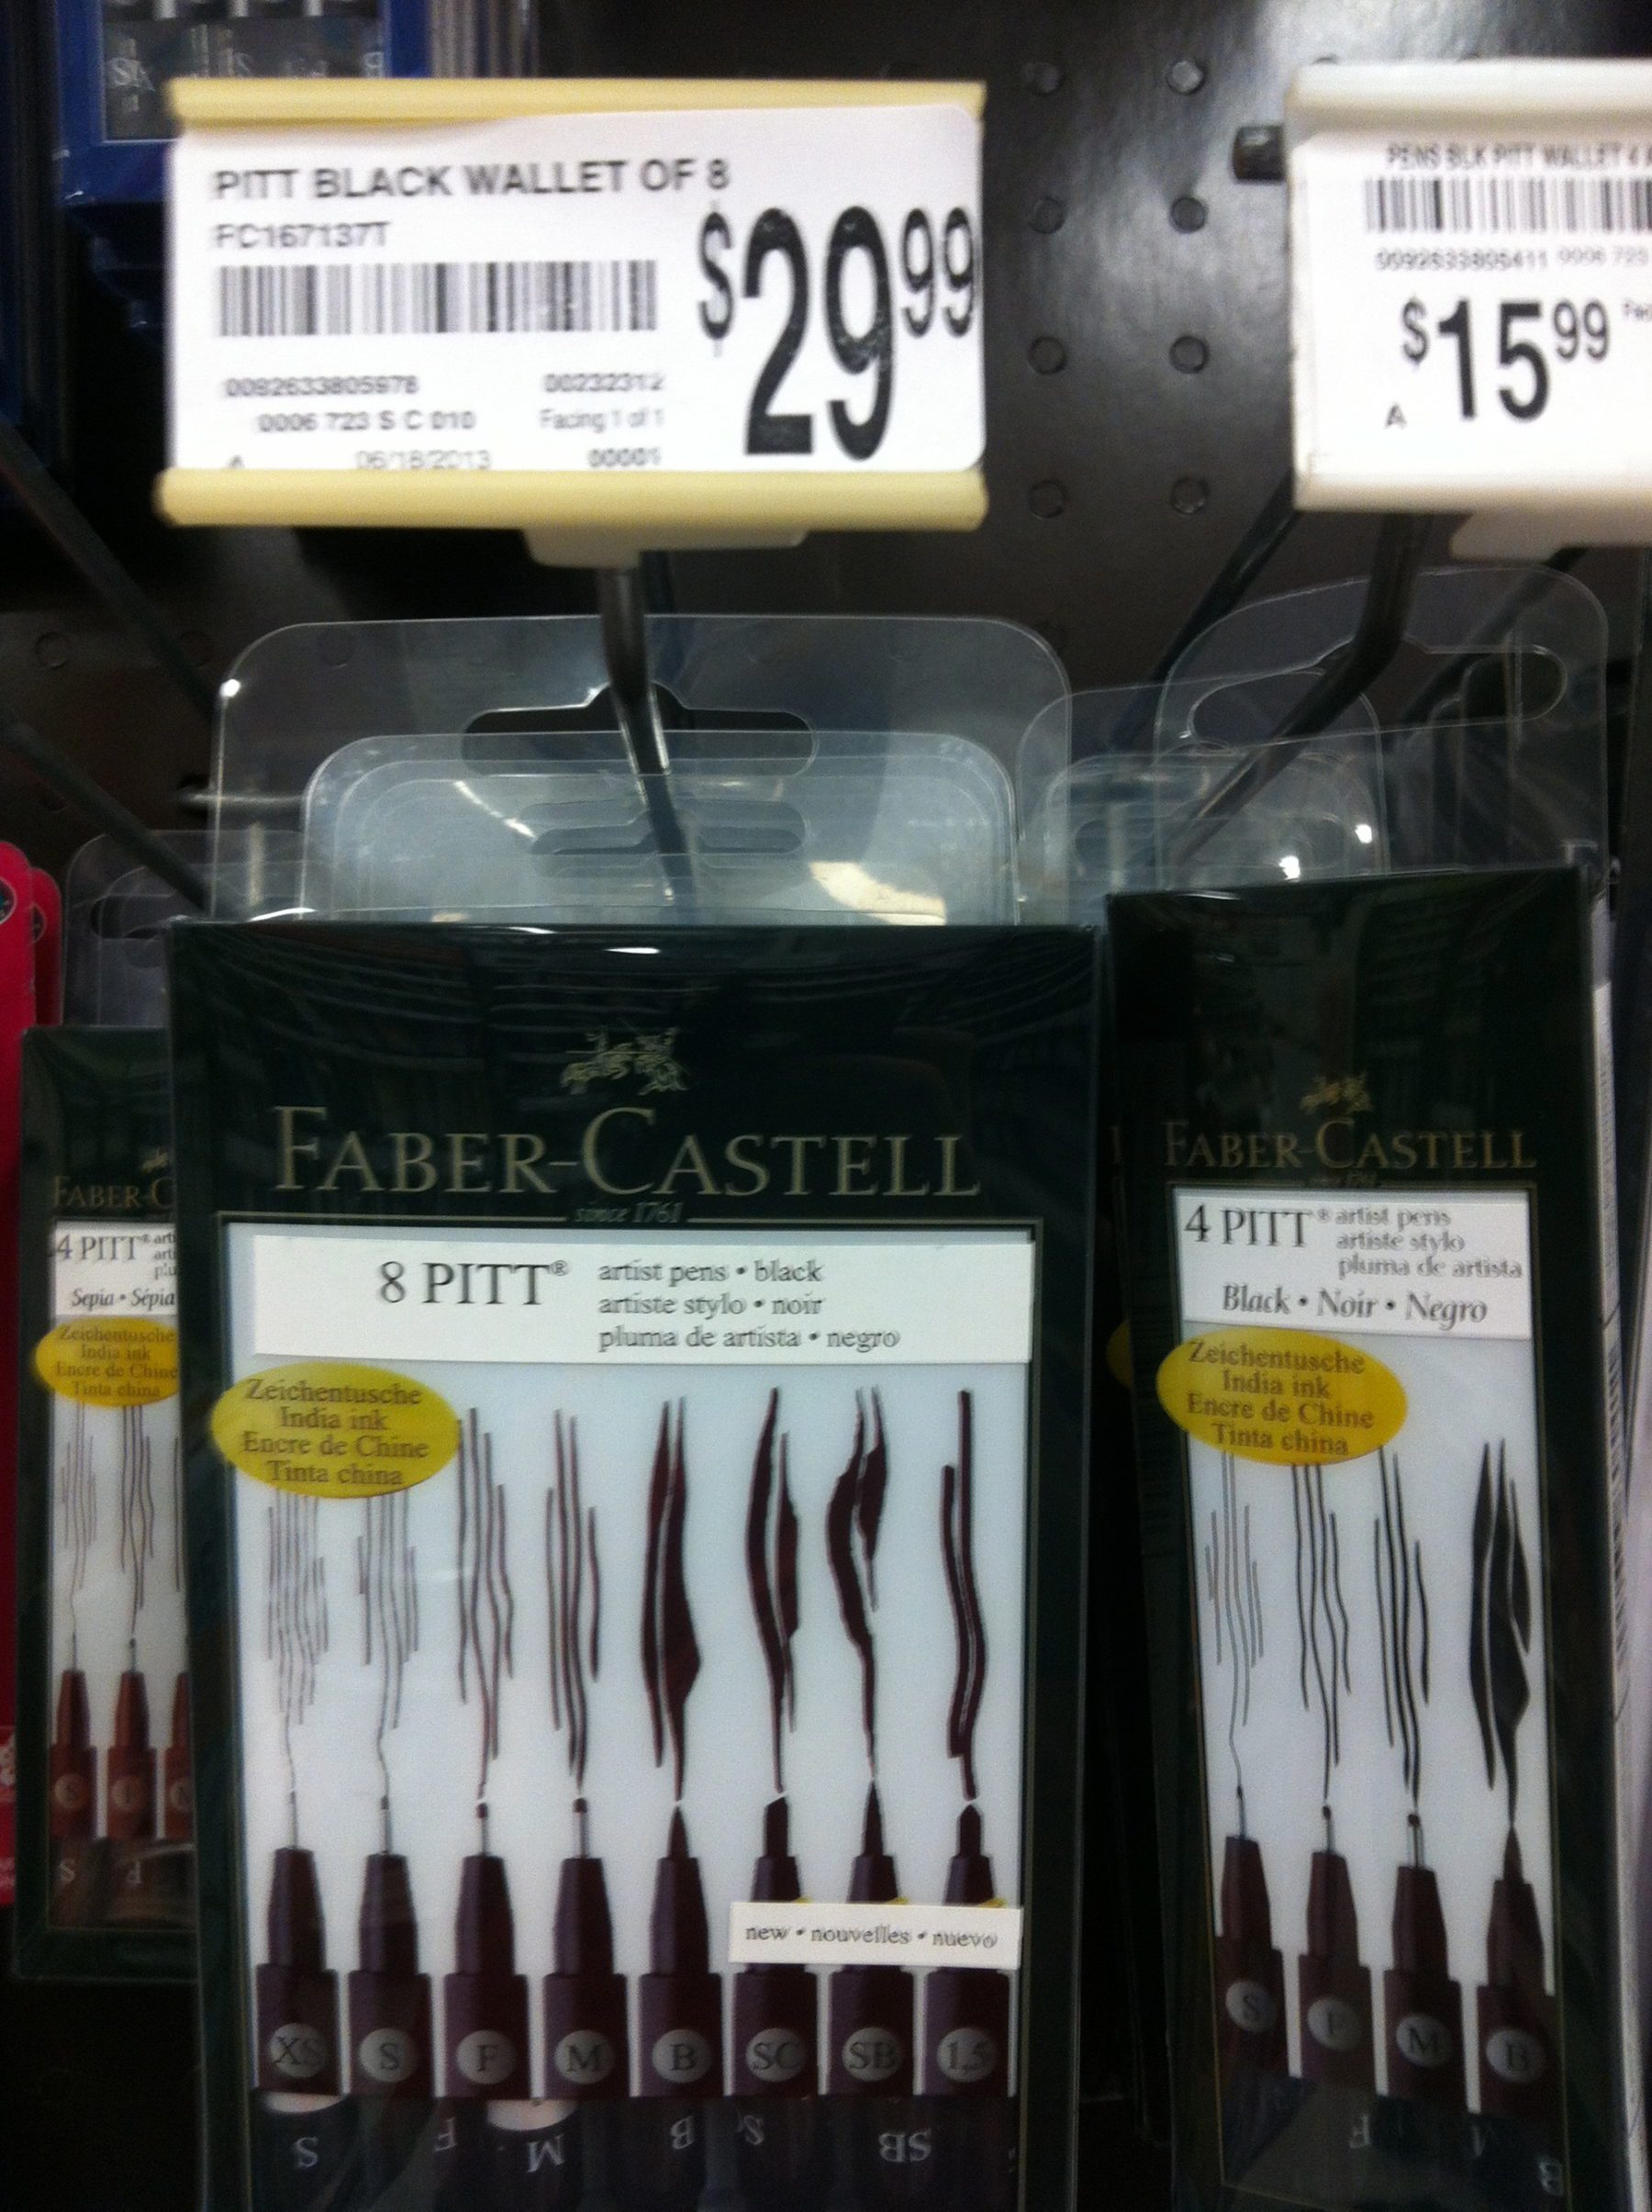 Faber-Castell Pitt Artist Pens 4-Pack Just $4 on , Great Gift for  Artists!